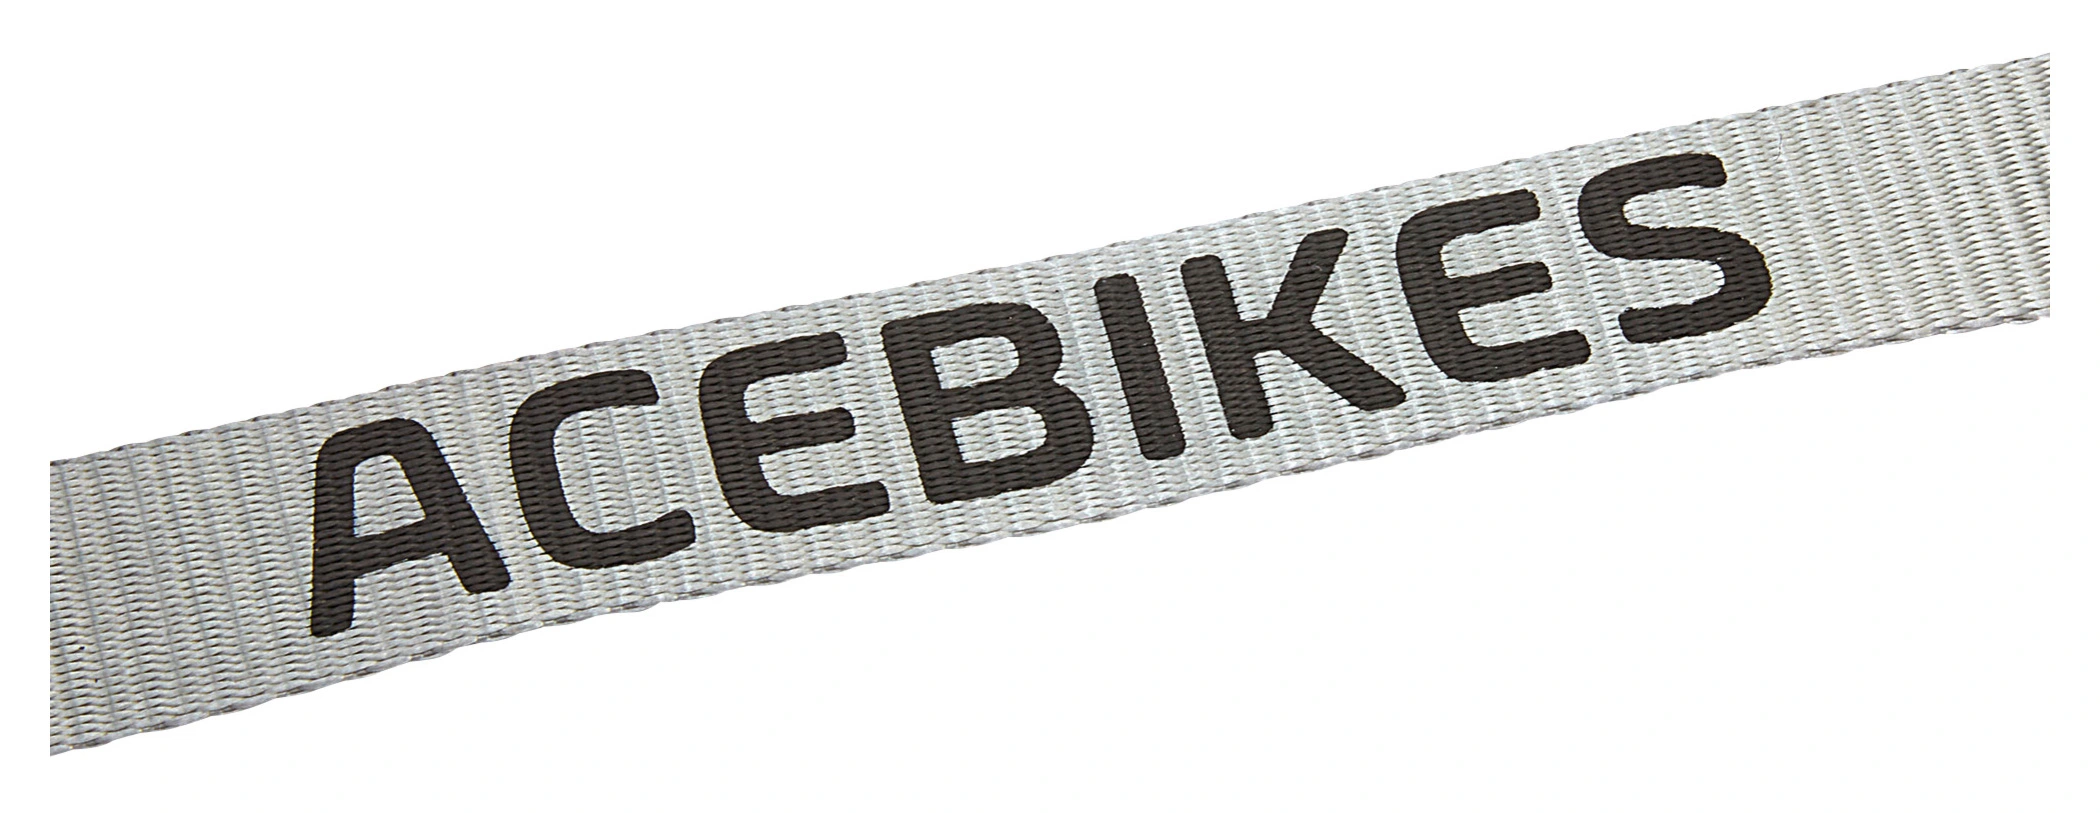 ACEBIKES BUCKLE-UP